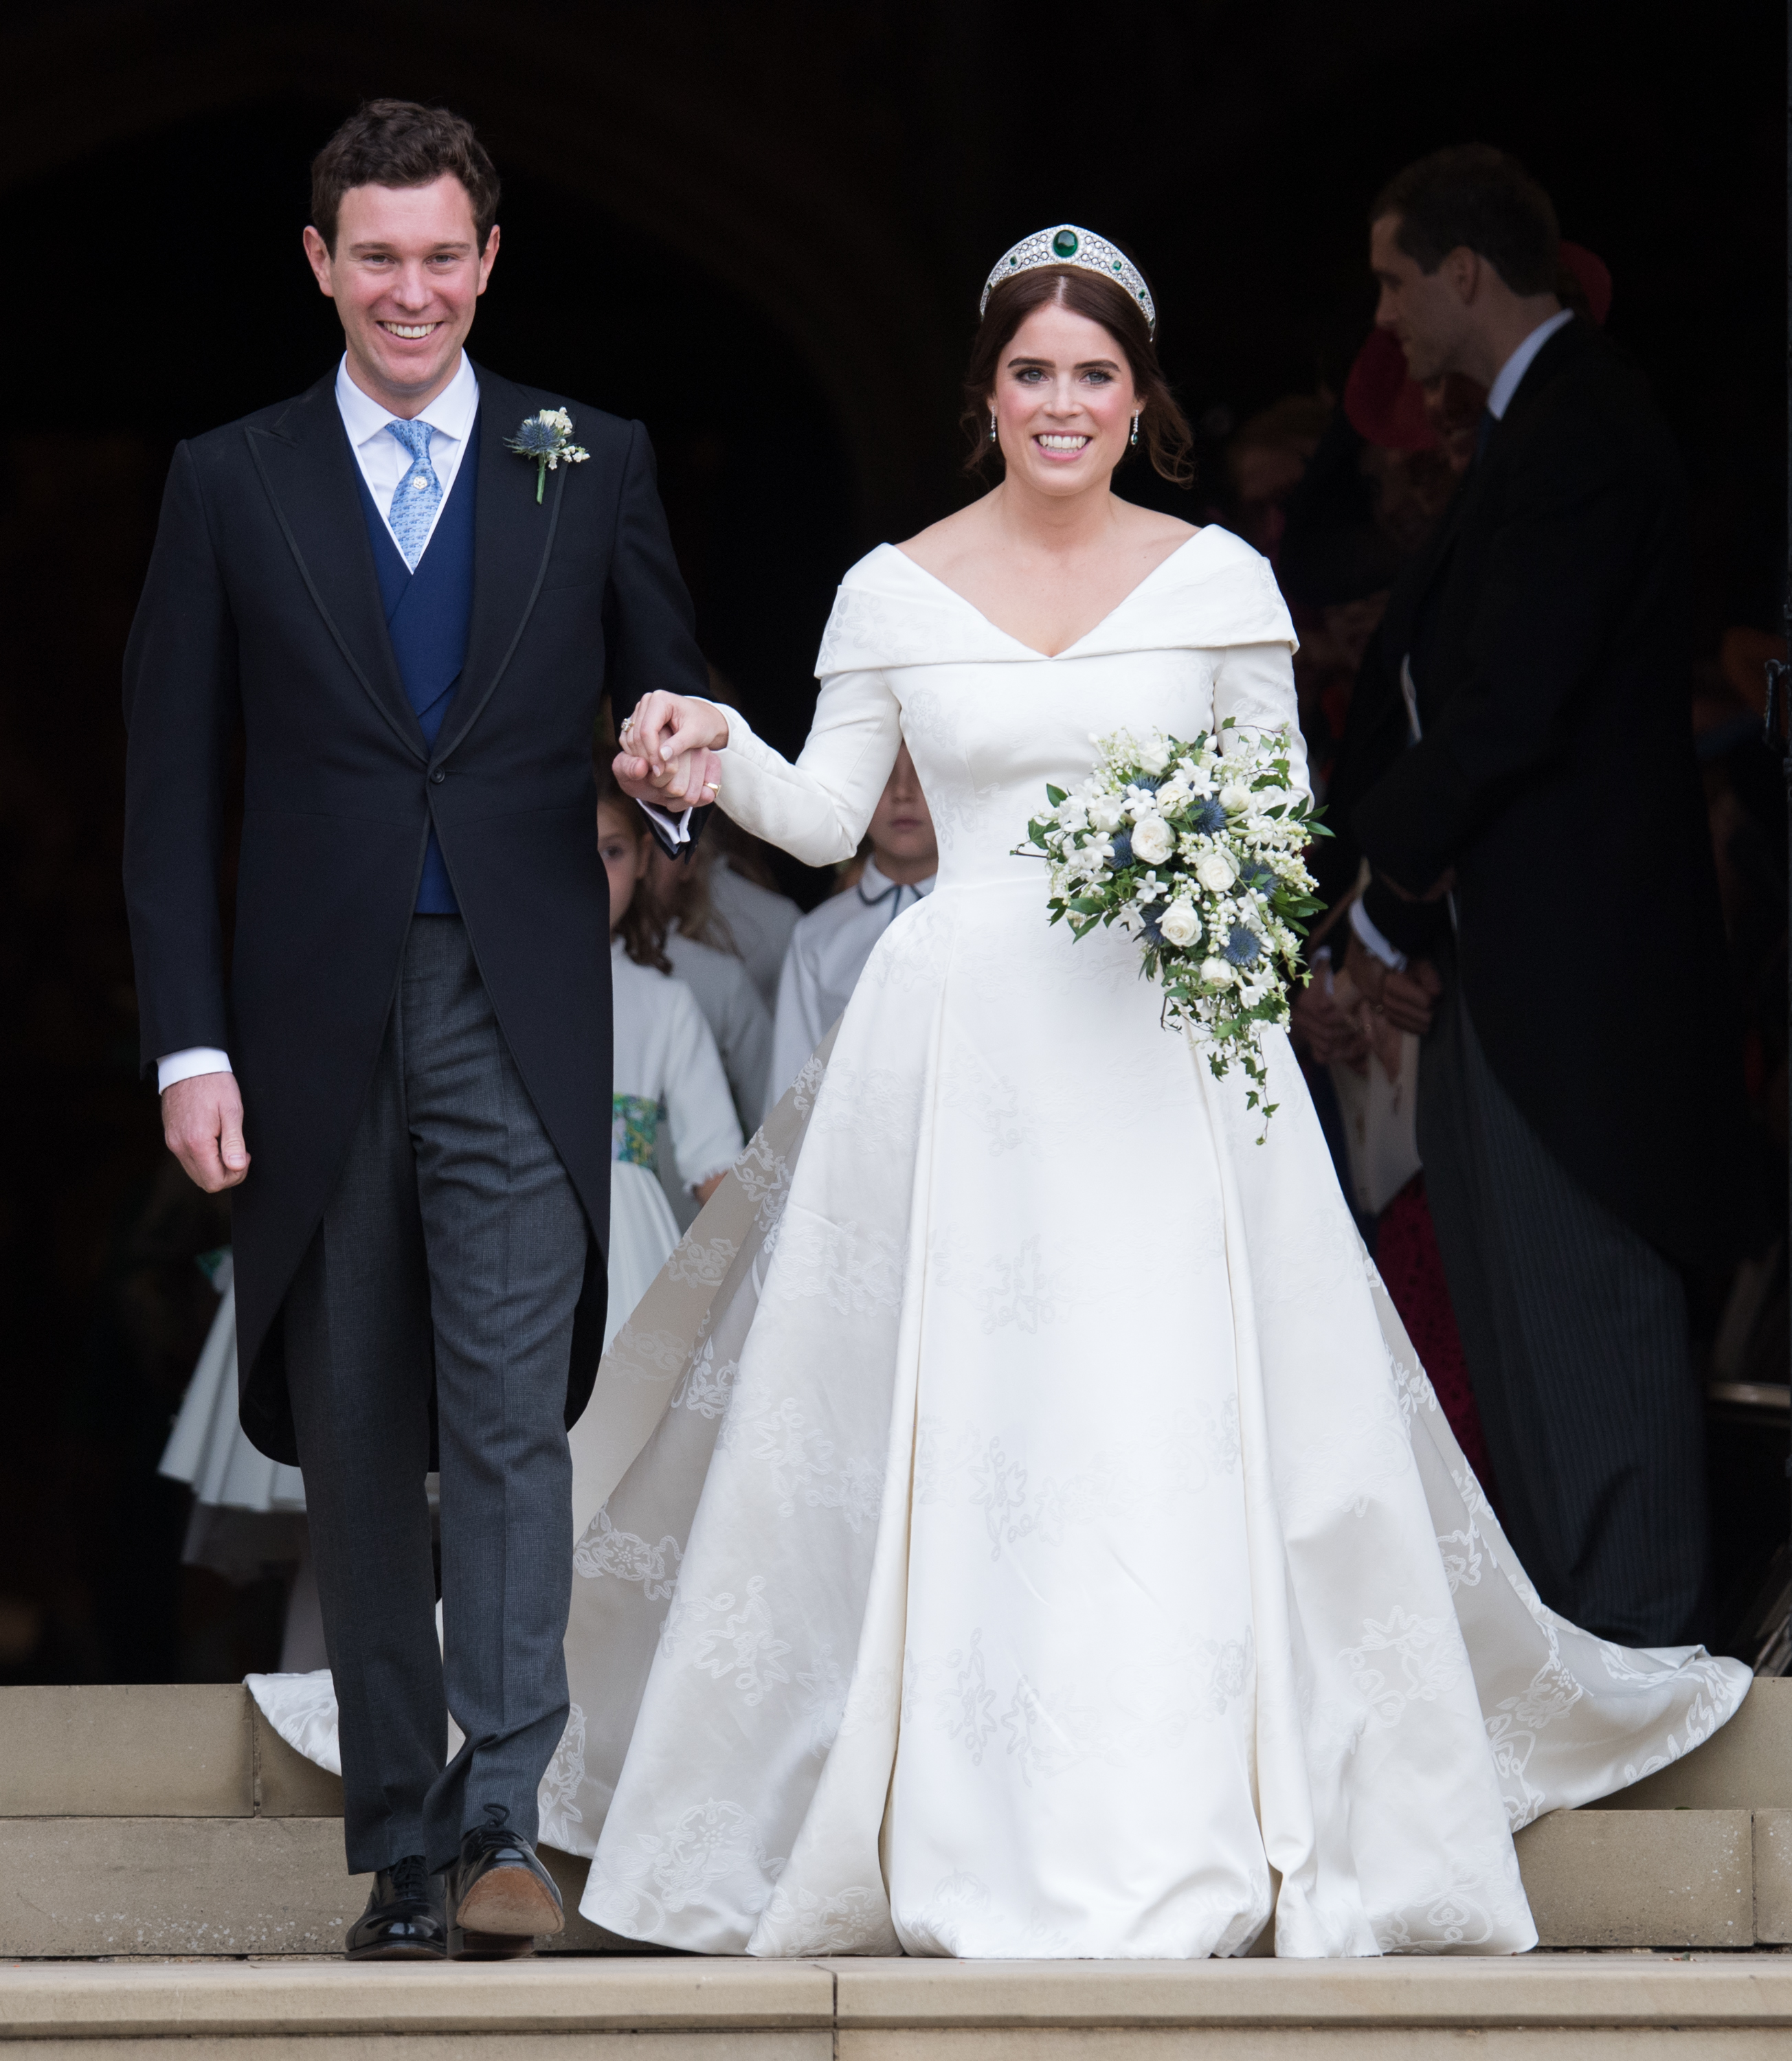 Princess Eugenie of York and Jack Brooksbank leave St George's Chapel in Windsor Castle following their wedding at St. George's Chapel on October 12, 2018 in Windsor, England. (Pool/Samir Hussein—WireImage)